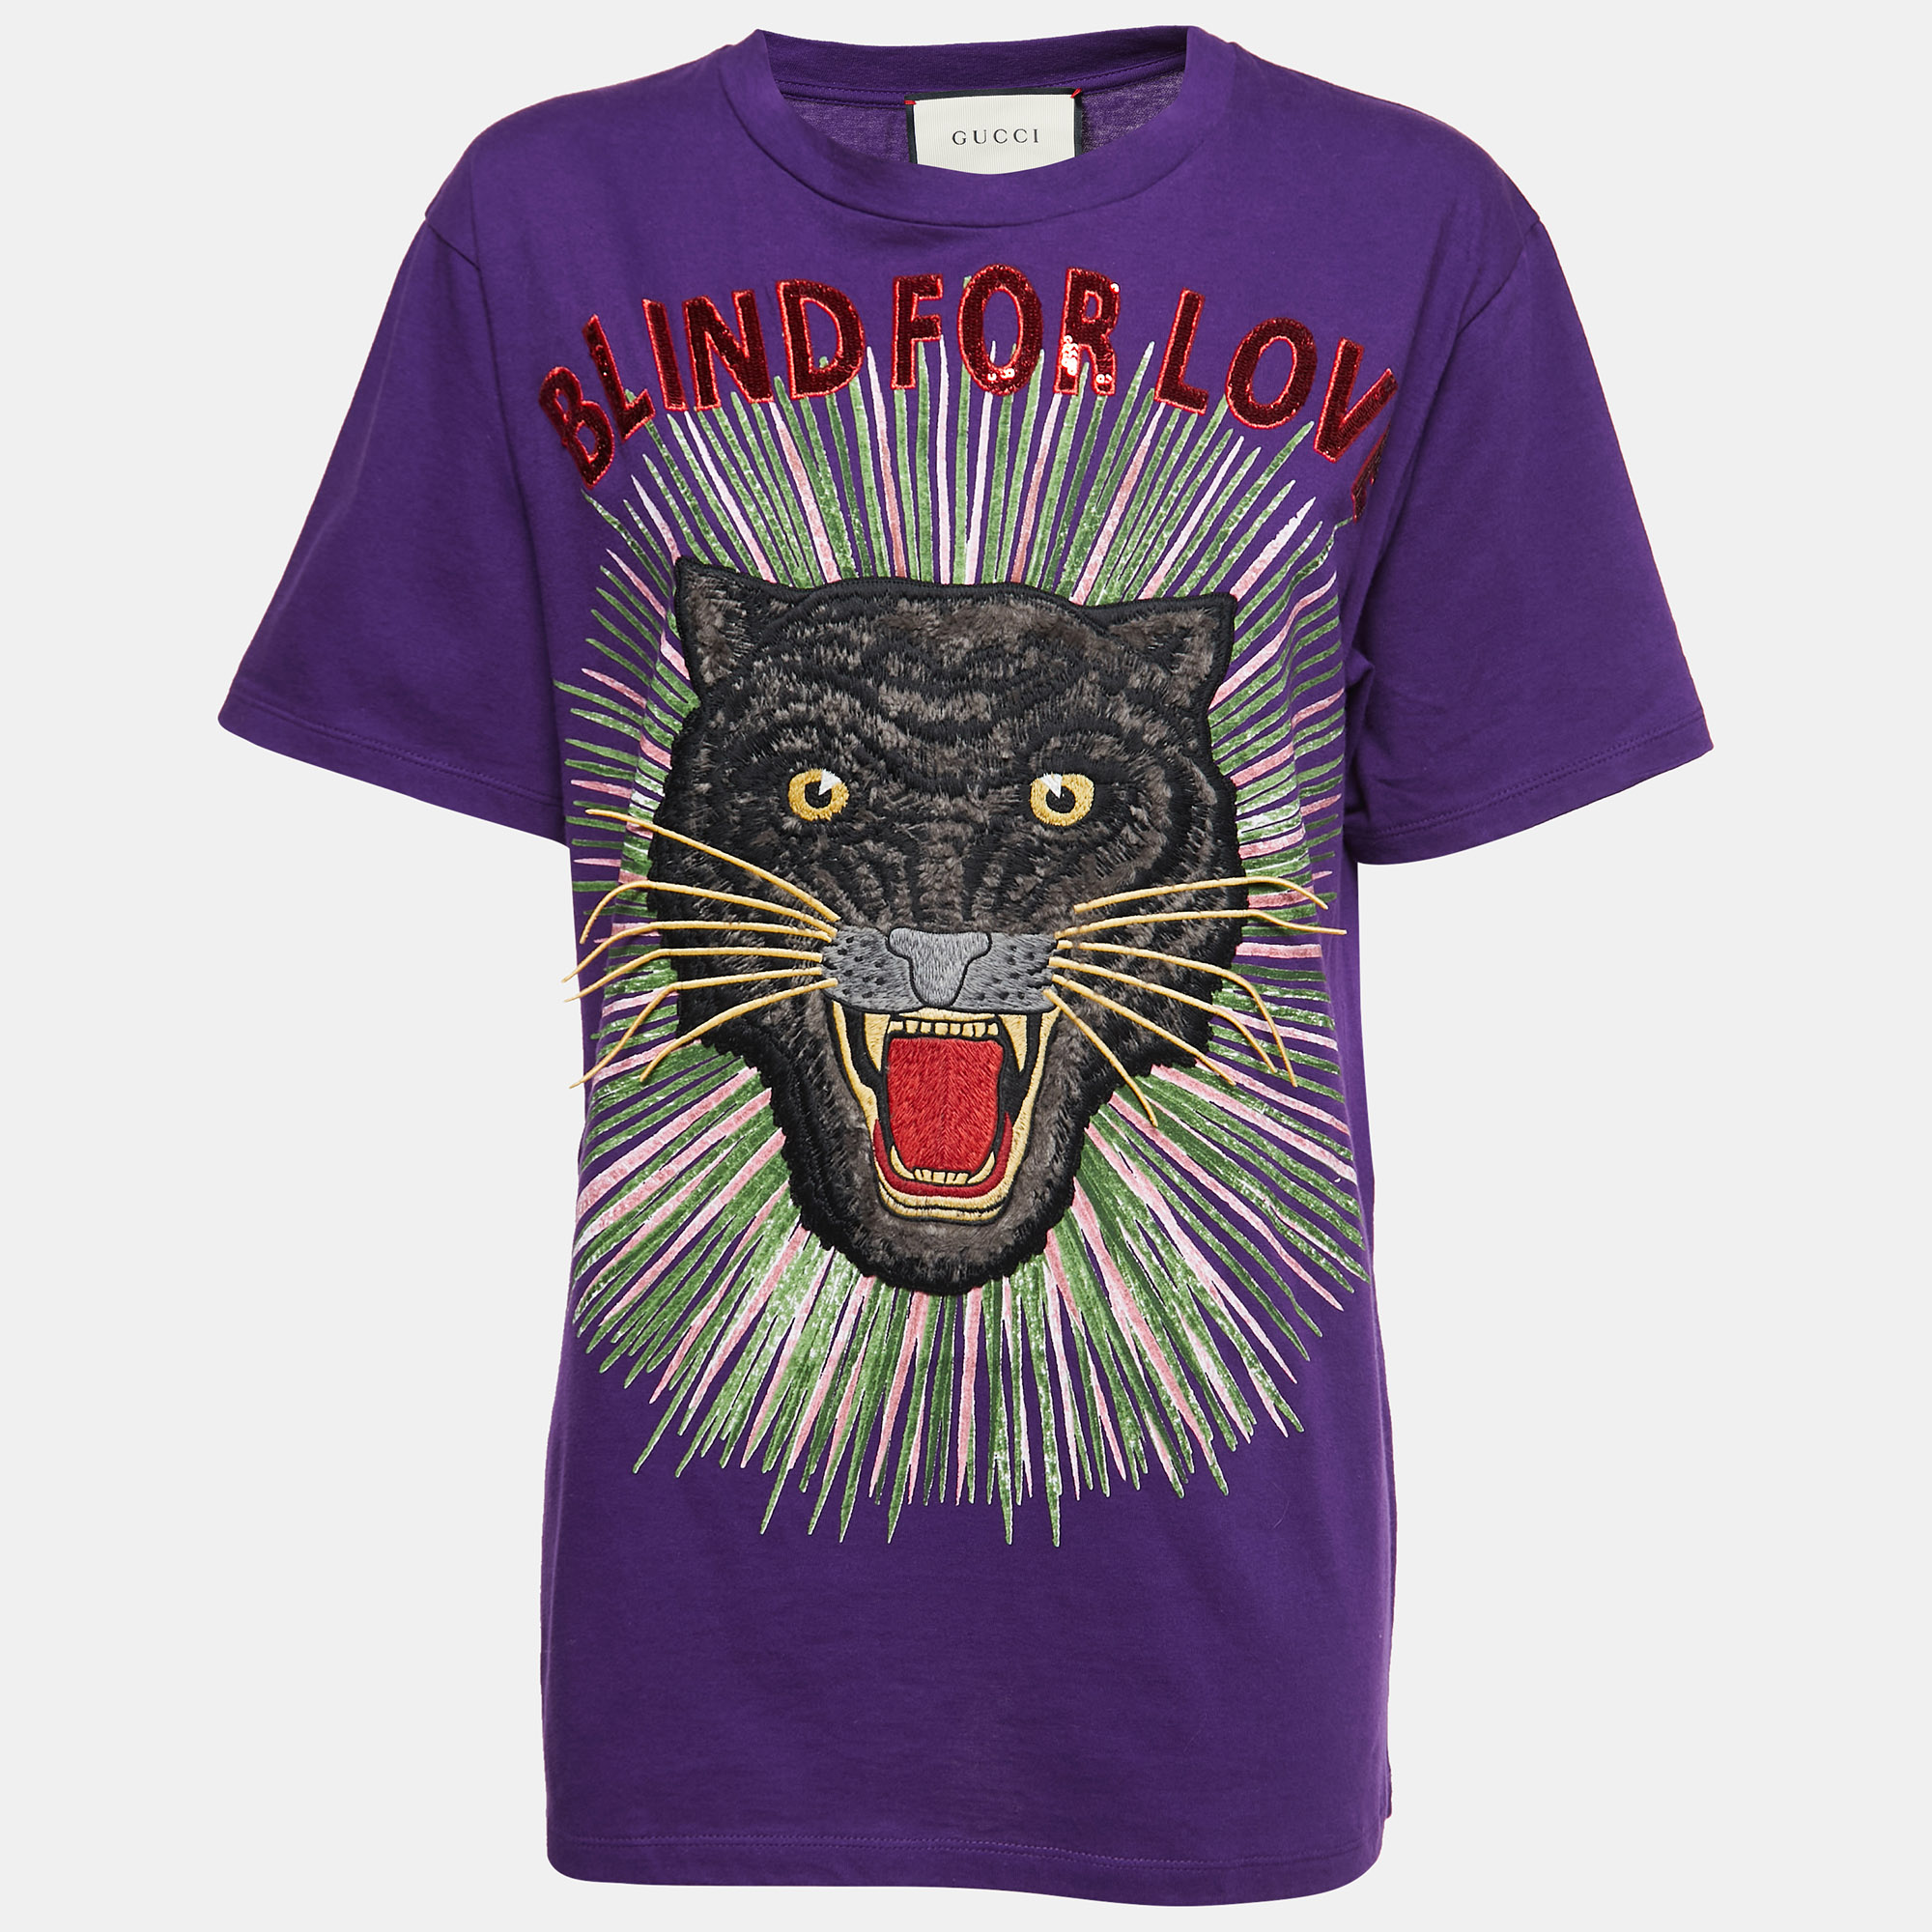 Gucci Purple Cotton Blind For Love Embroidered T-shirt Xs | ModeSens